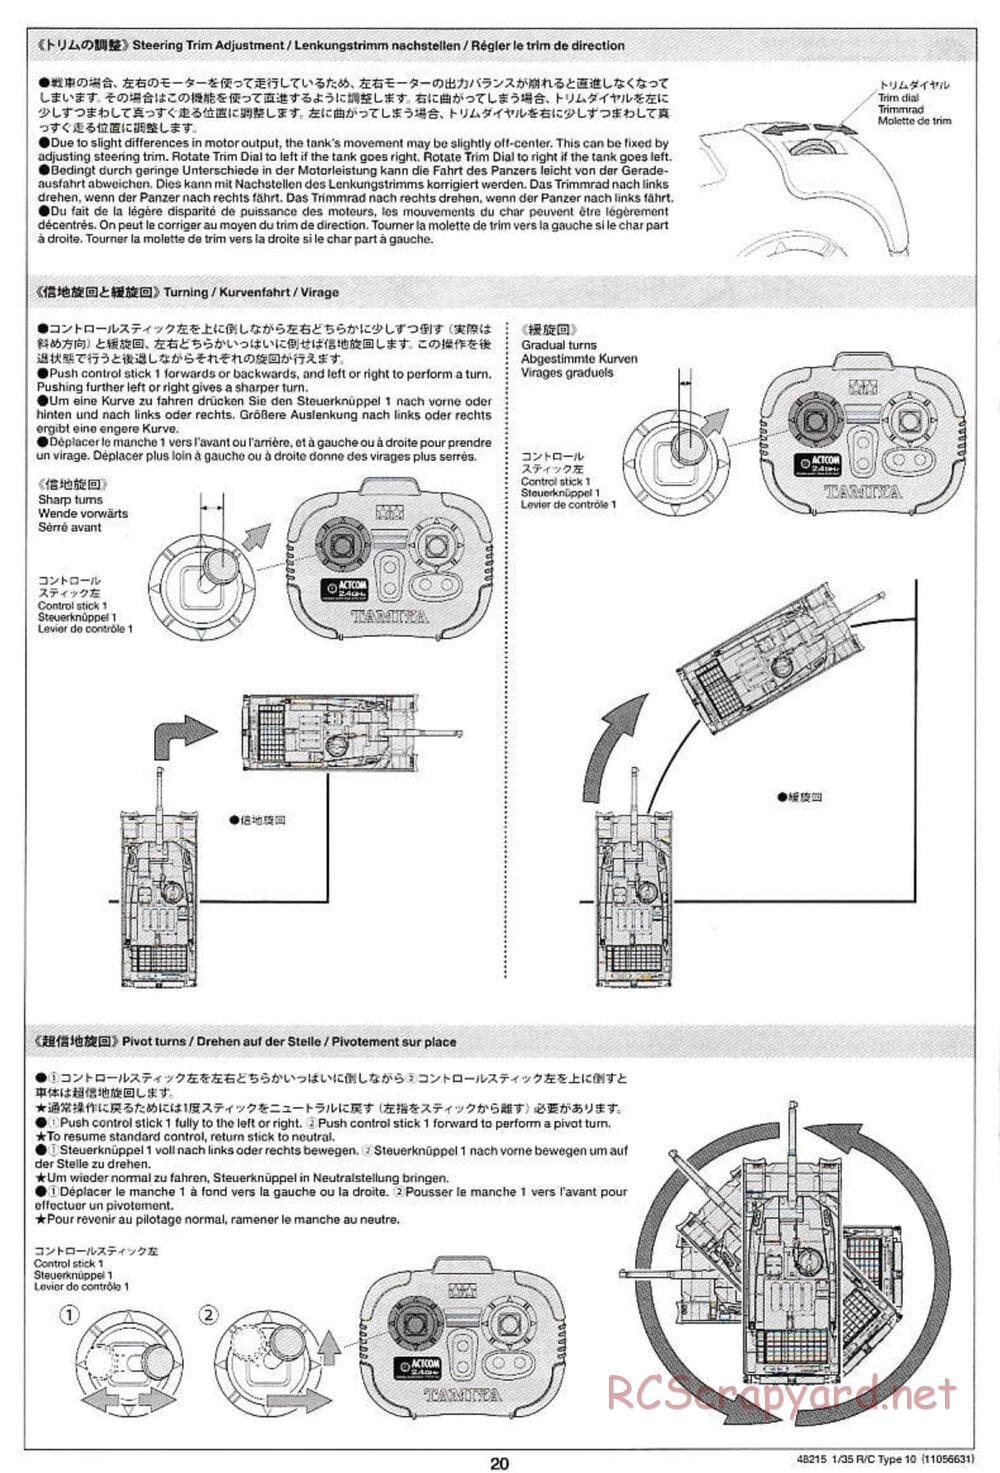 Tamiya - JGSDF Type 10 Tank - 1/35 Scale Chassis - Manual - Page 20